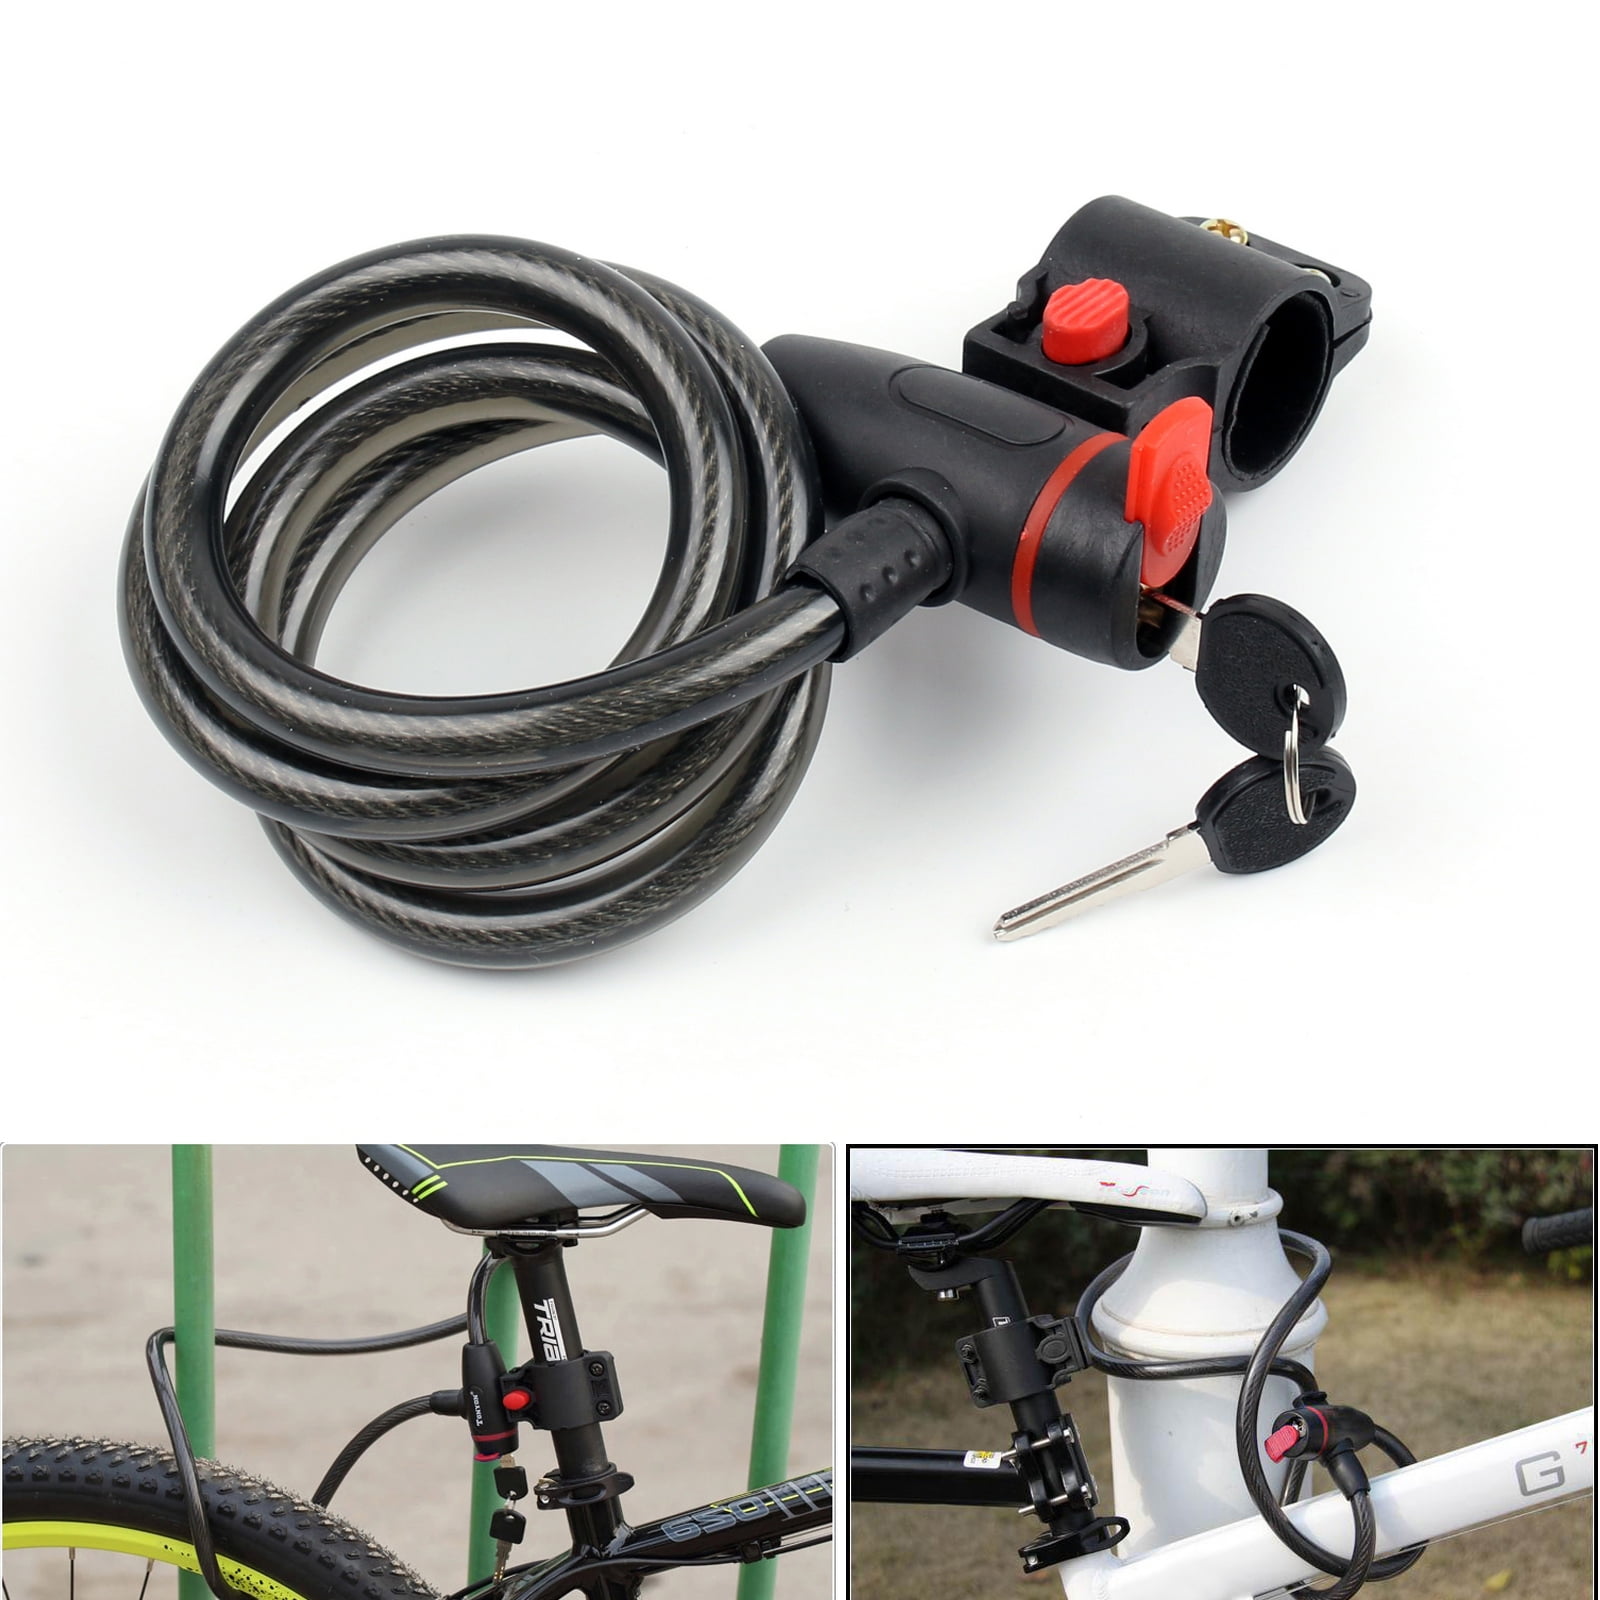 Bicycle Manganese Steel Coiling Locks for Outdoor Cycling Riding Security Portable Locker Accessories Tool for Gate Fence Grill Ladder Stroller Bike Cable Lock with Mounting Bracket and Keys